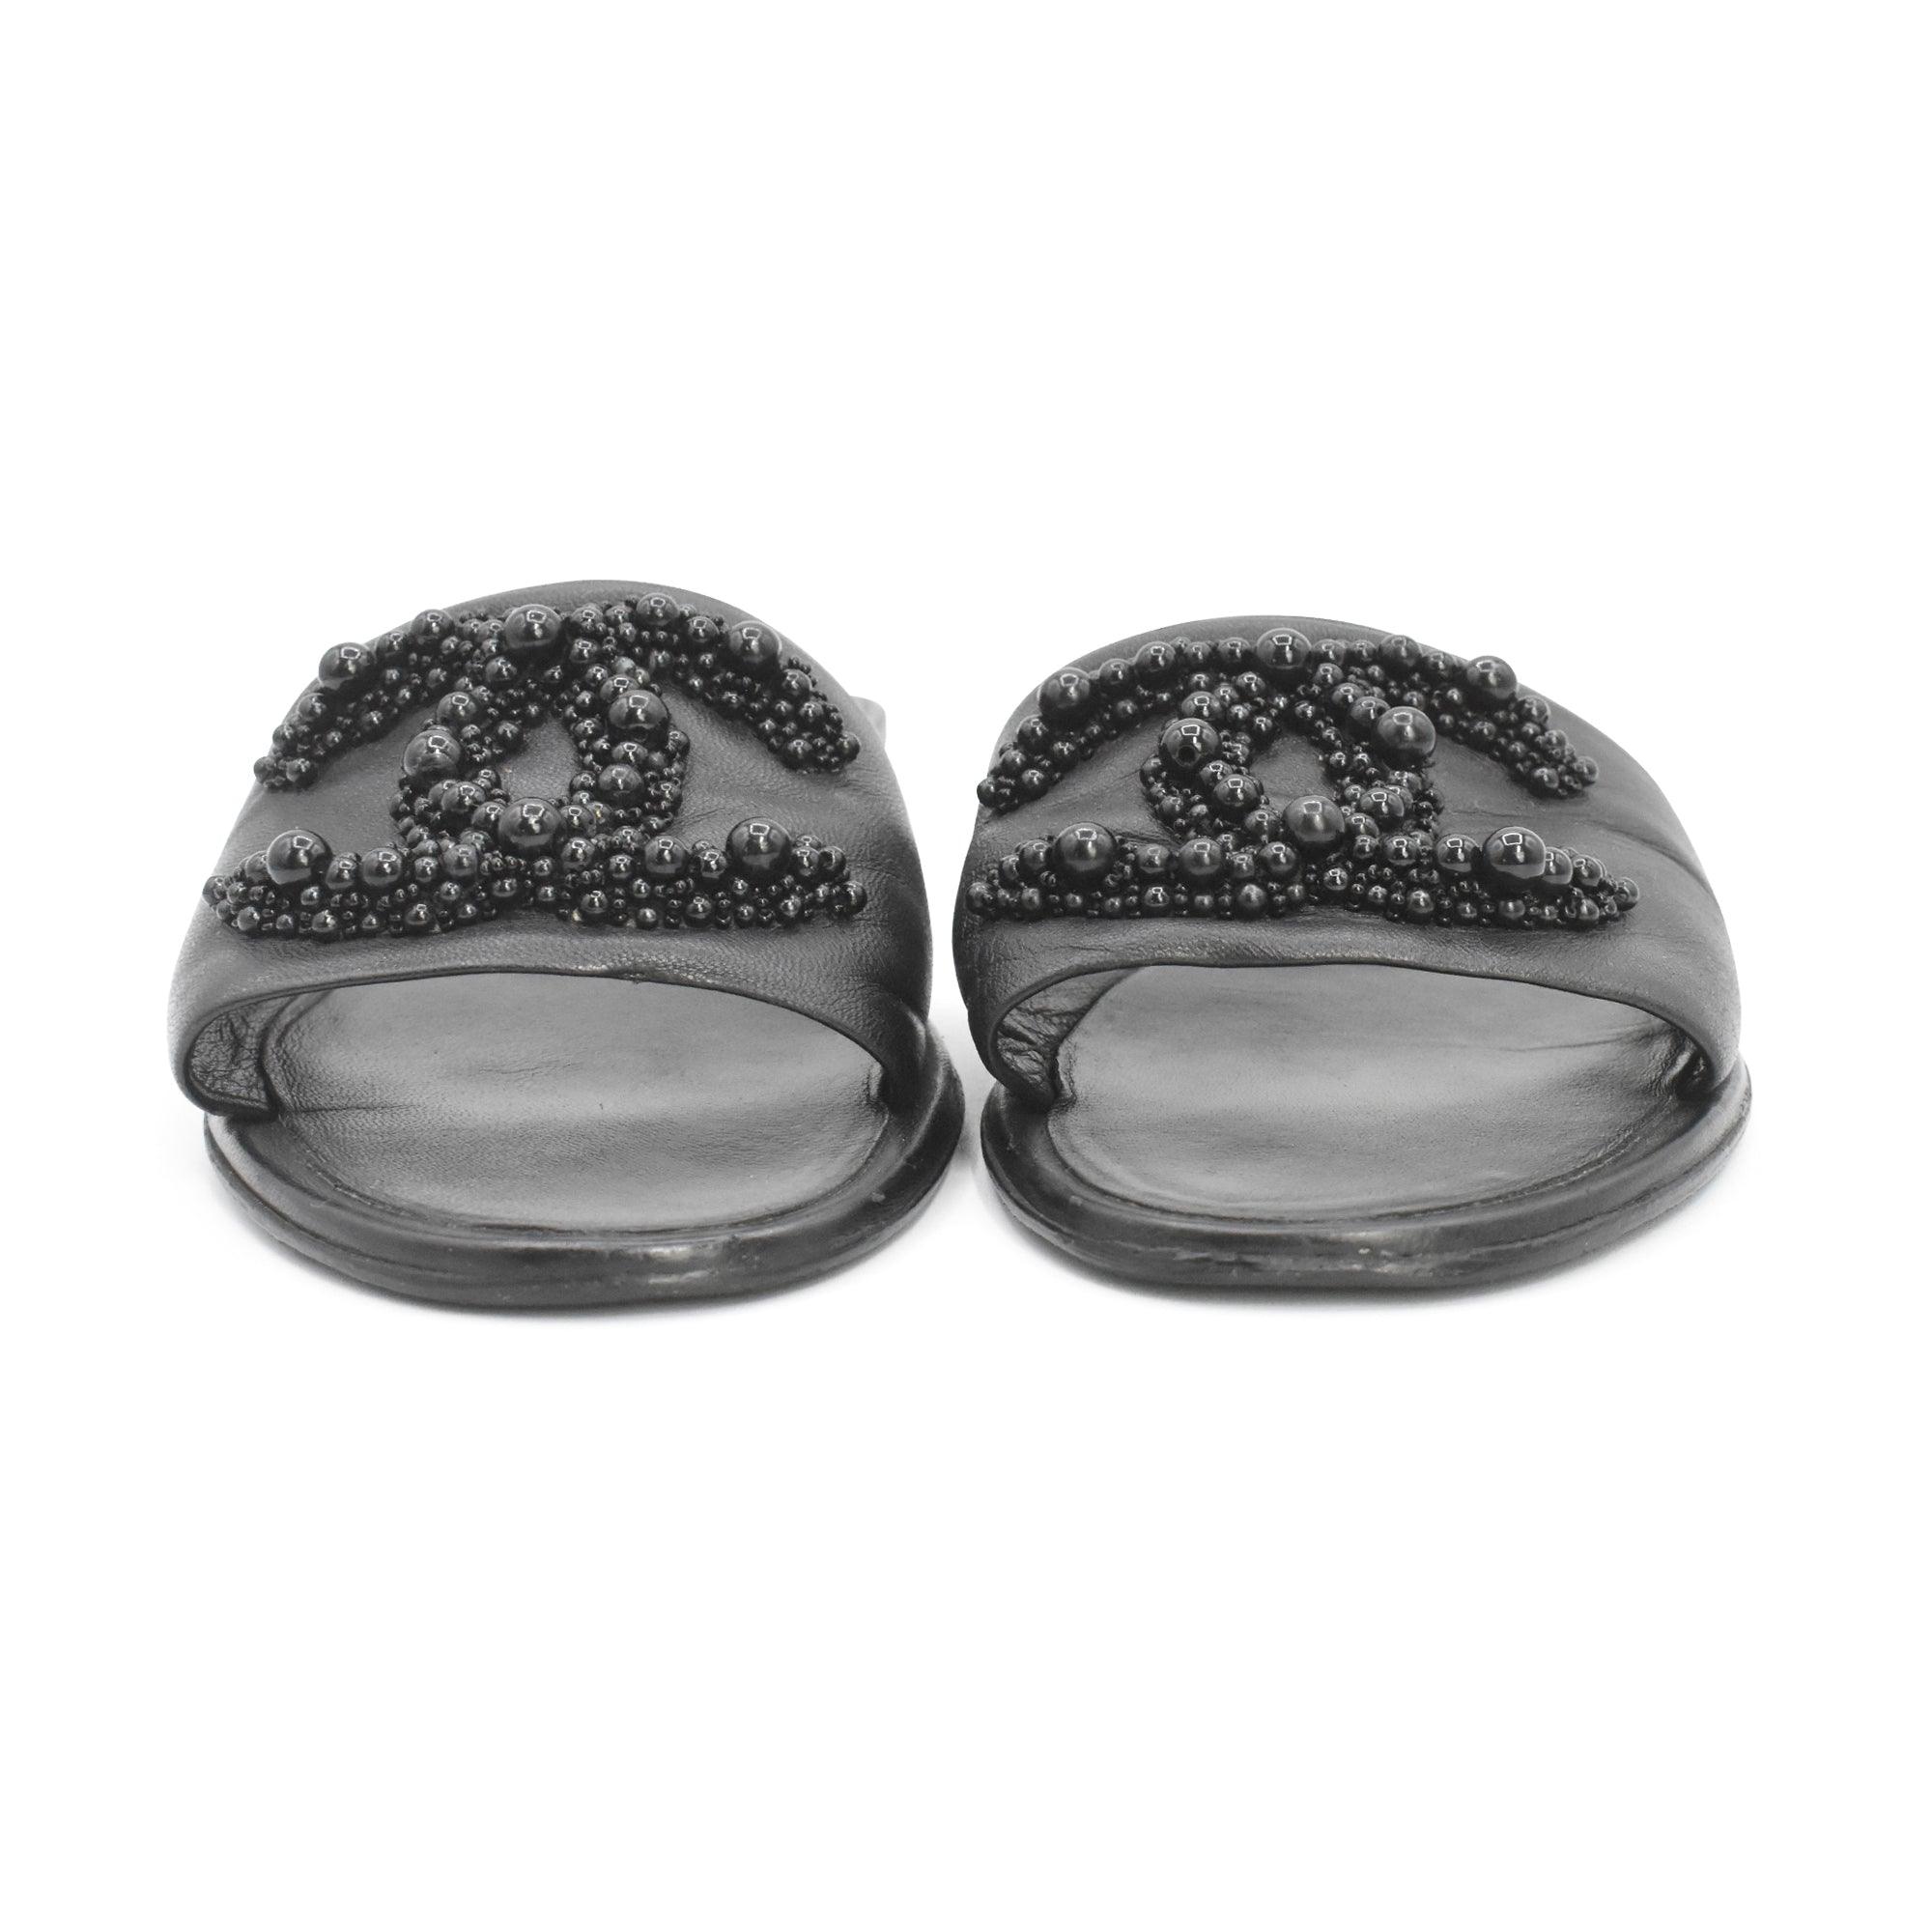 Chanel Slides - Women's 38.5 - Fashionably Yours